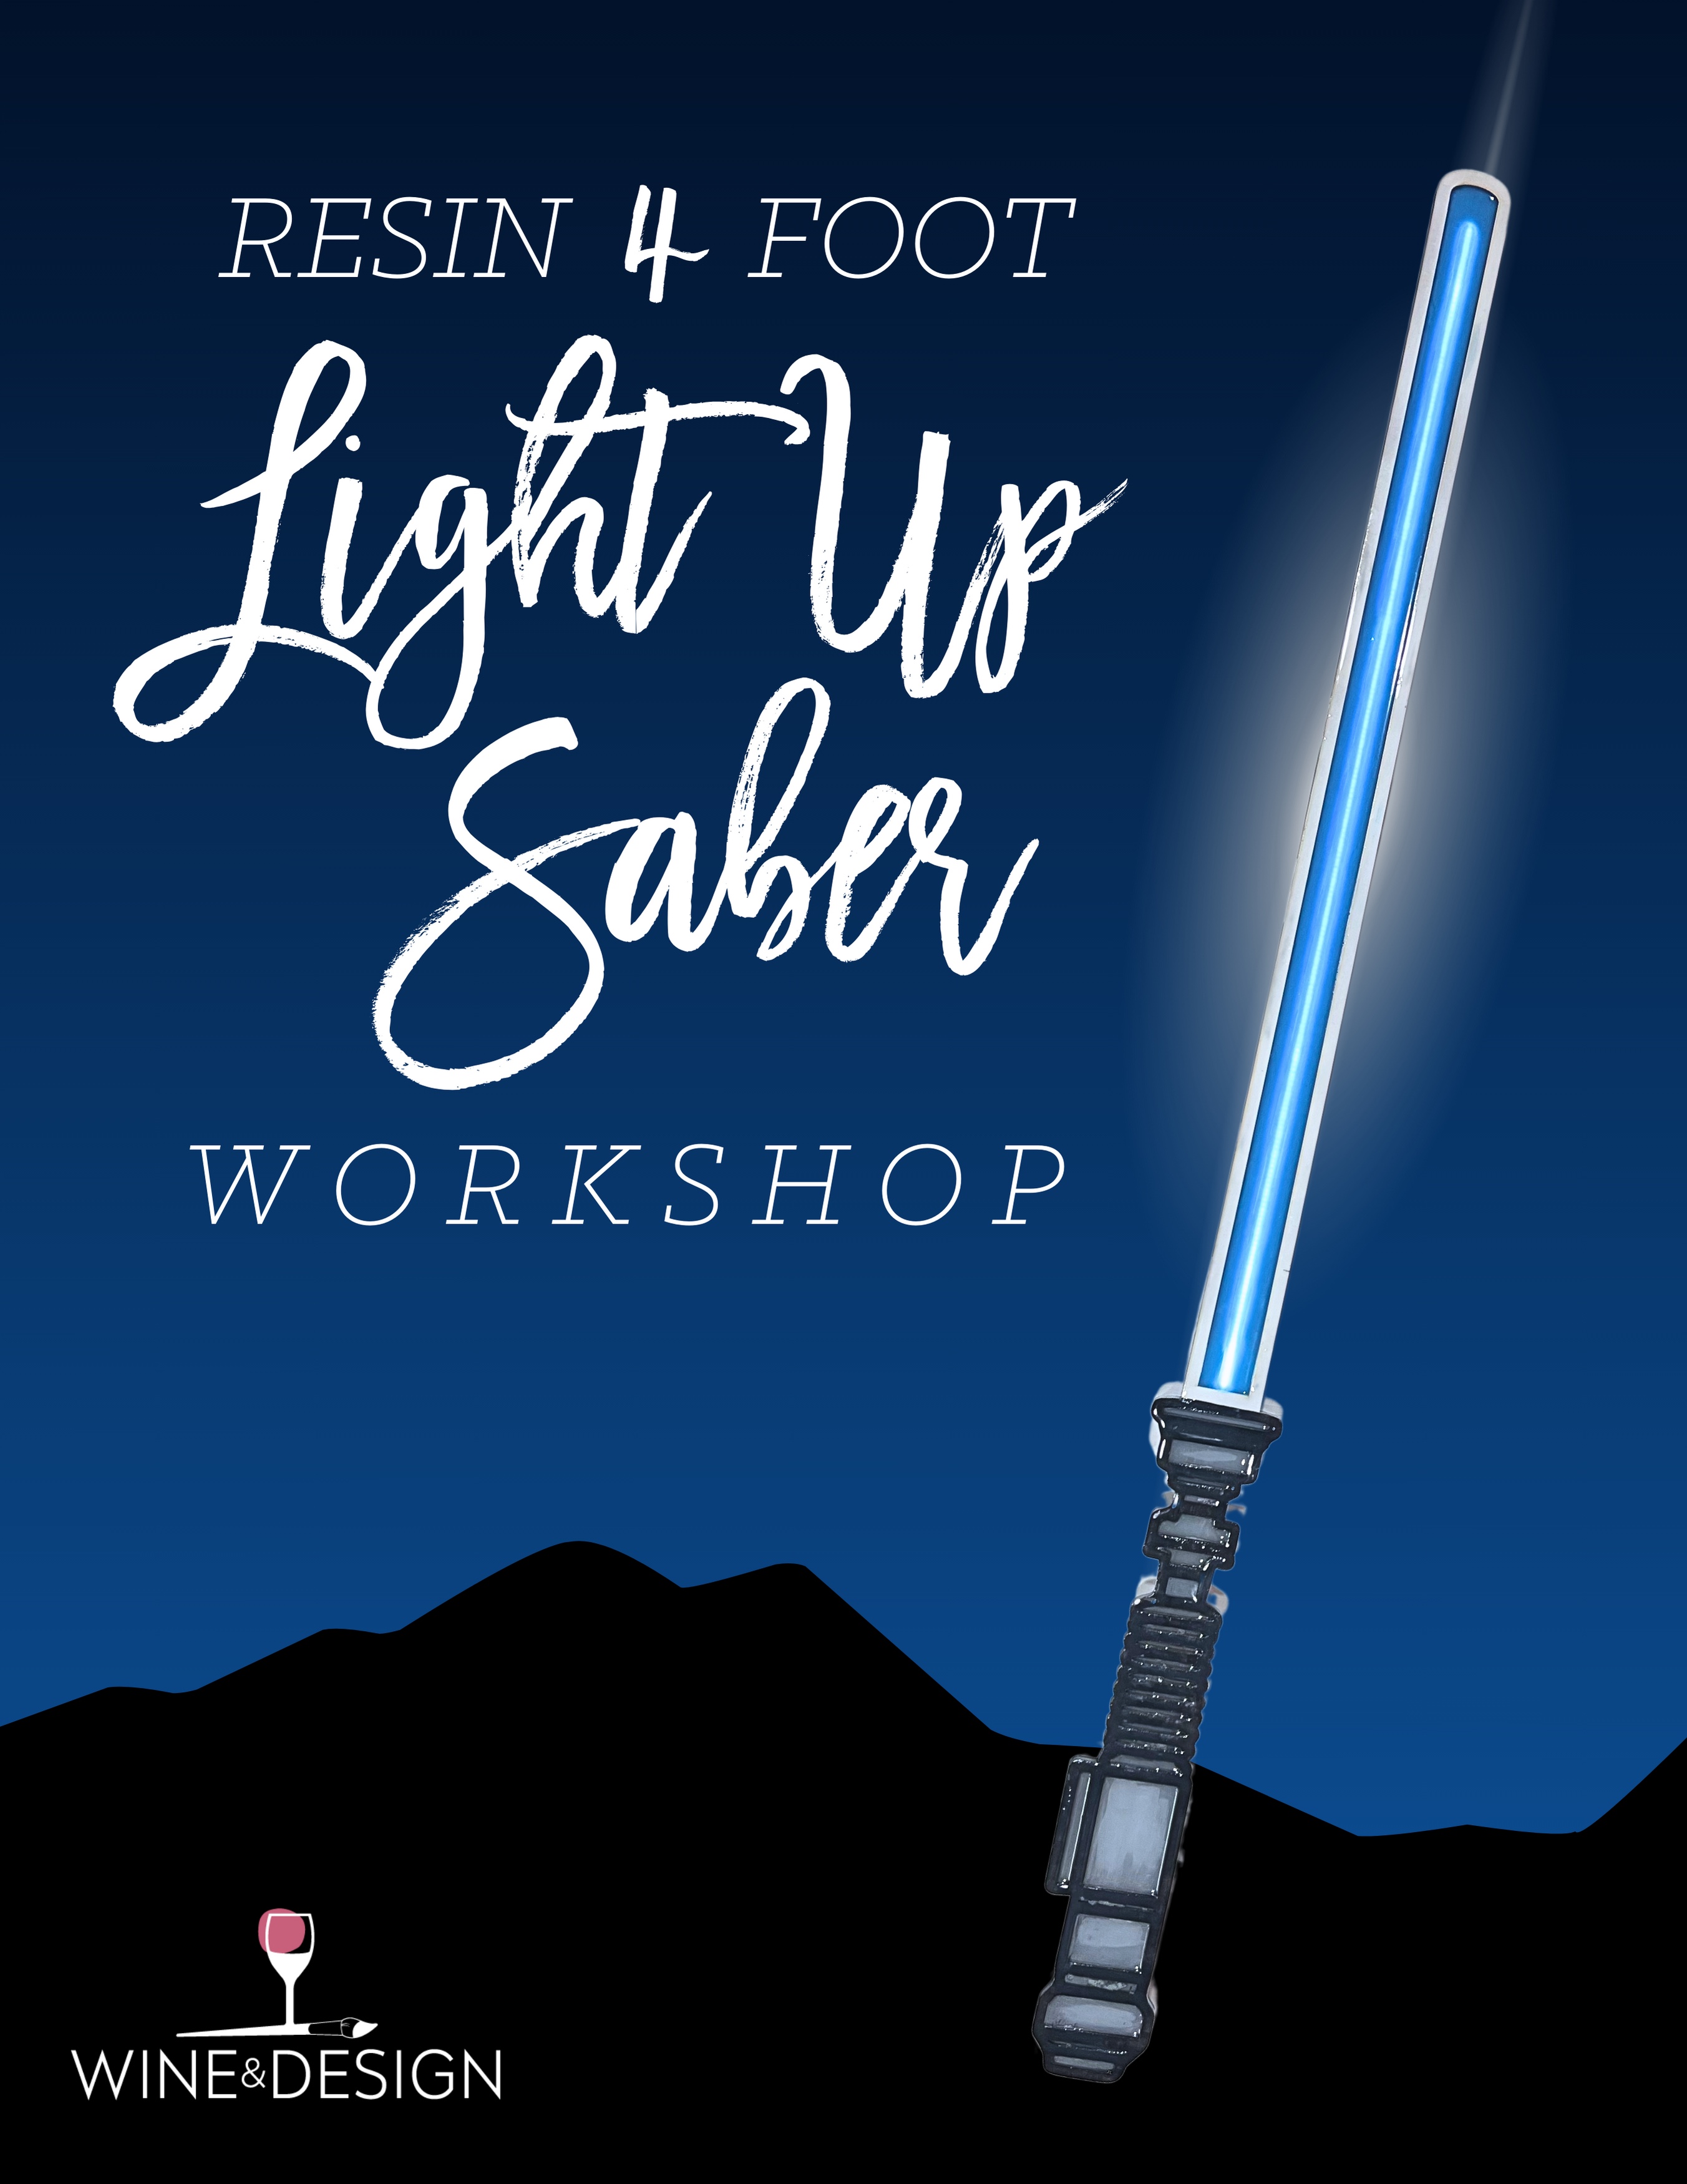 MAY THE 4TH BE WITH YOU - 4' RESIN POURED LIGHT UP SABER WORKSHOP